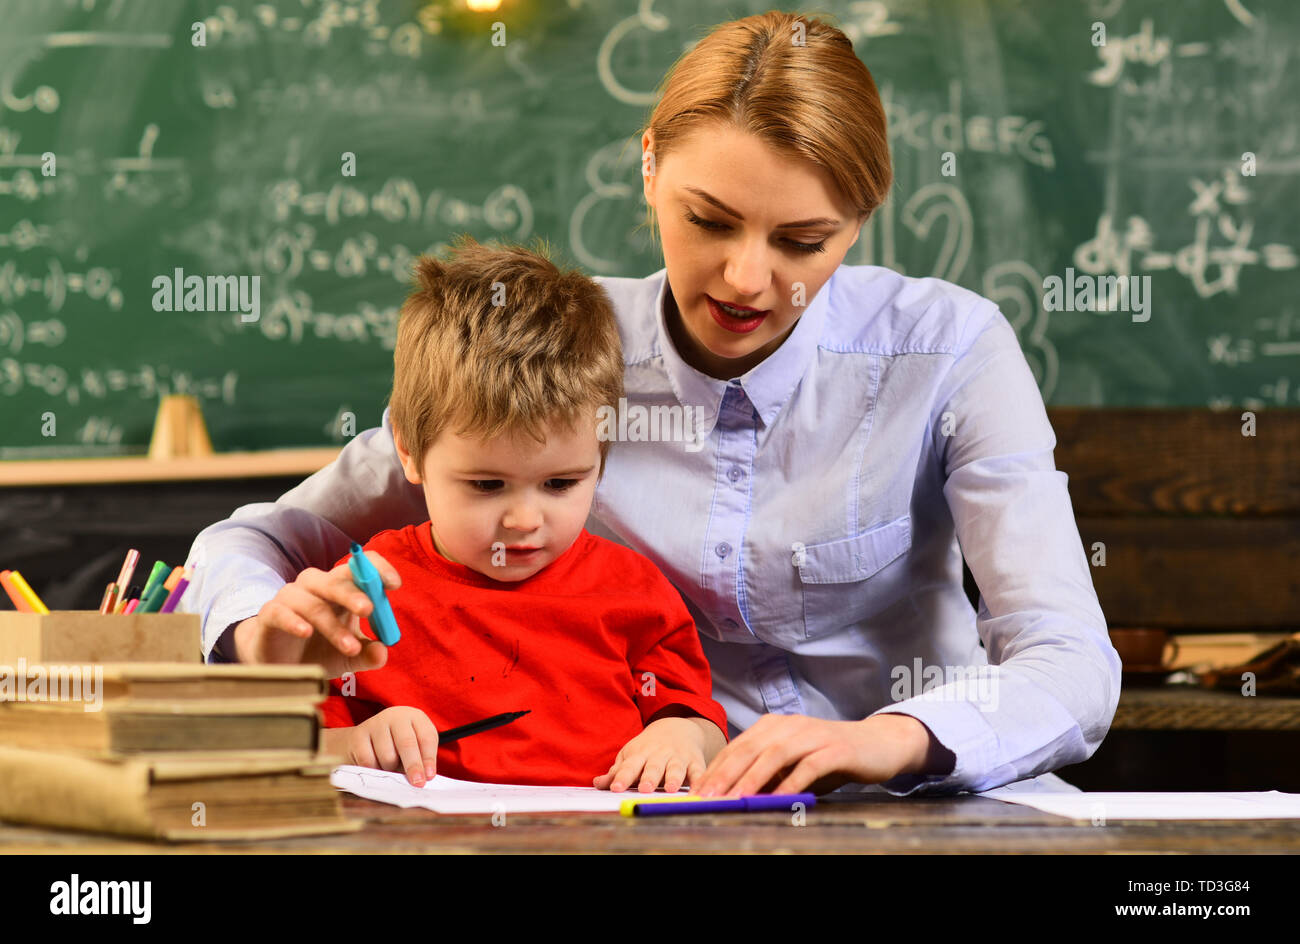 Education graduation and people concept - successful tutor in mortar boards, What qualities make teacher, E-learning Online Study Learning Concept, E Stock Photo